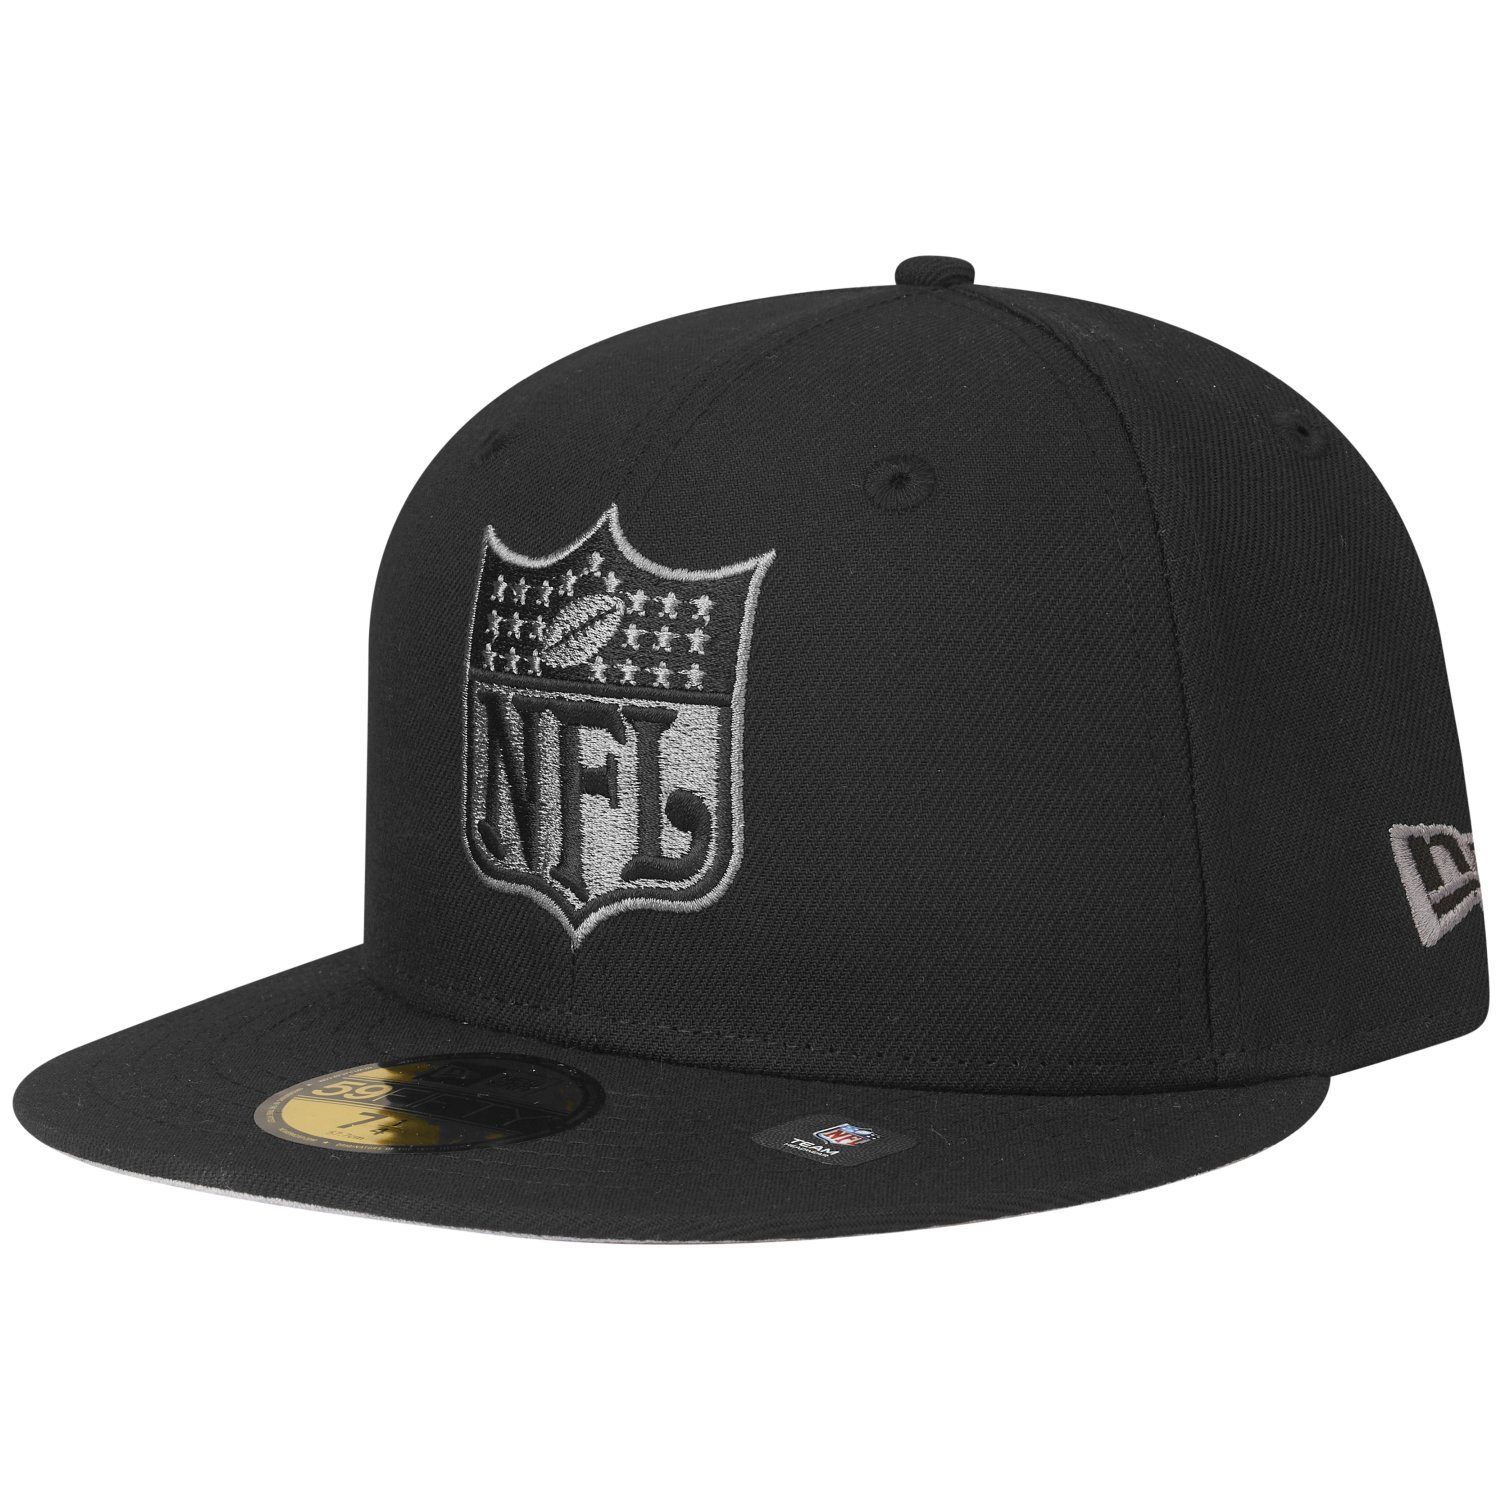 New Era Fitted Cap 59Fifty NFL TEAMS NFL SHIELD